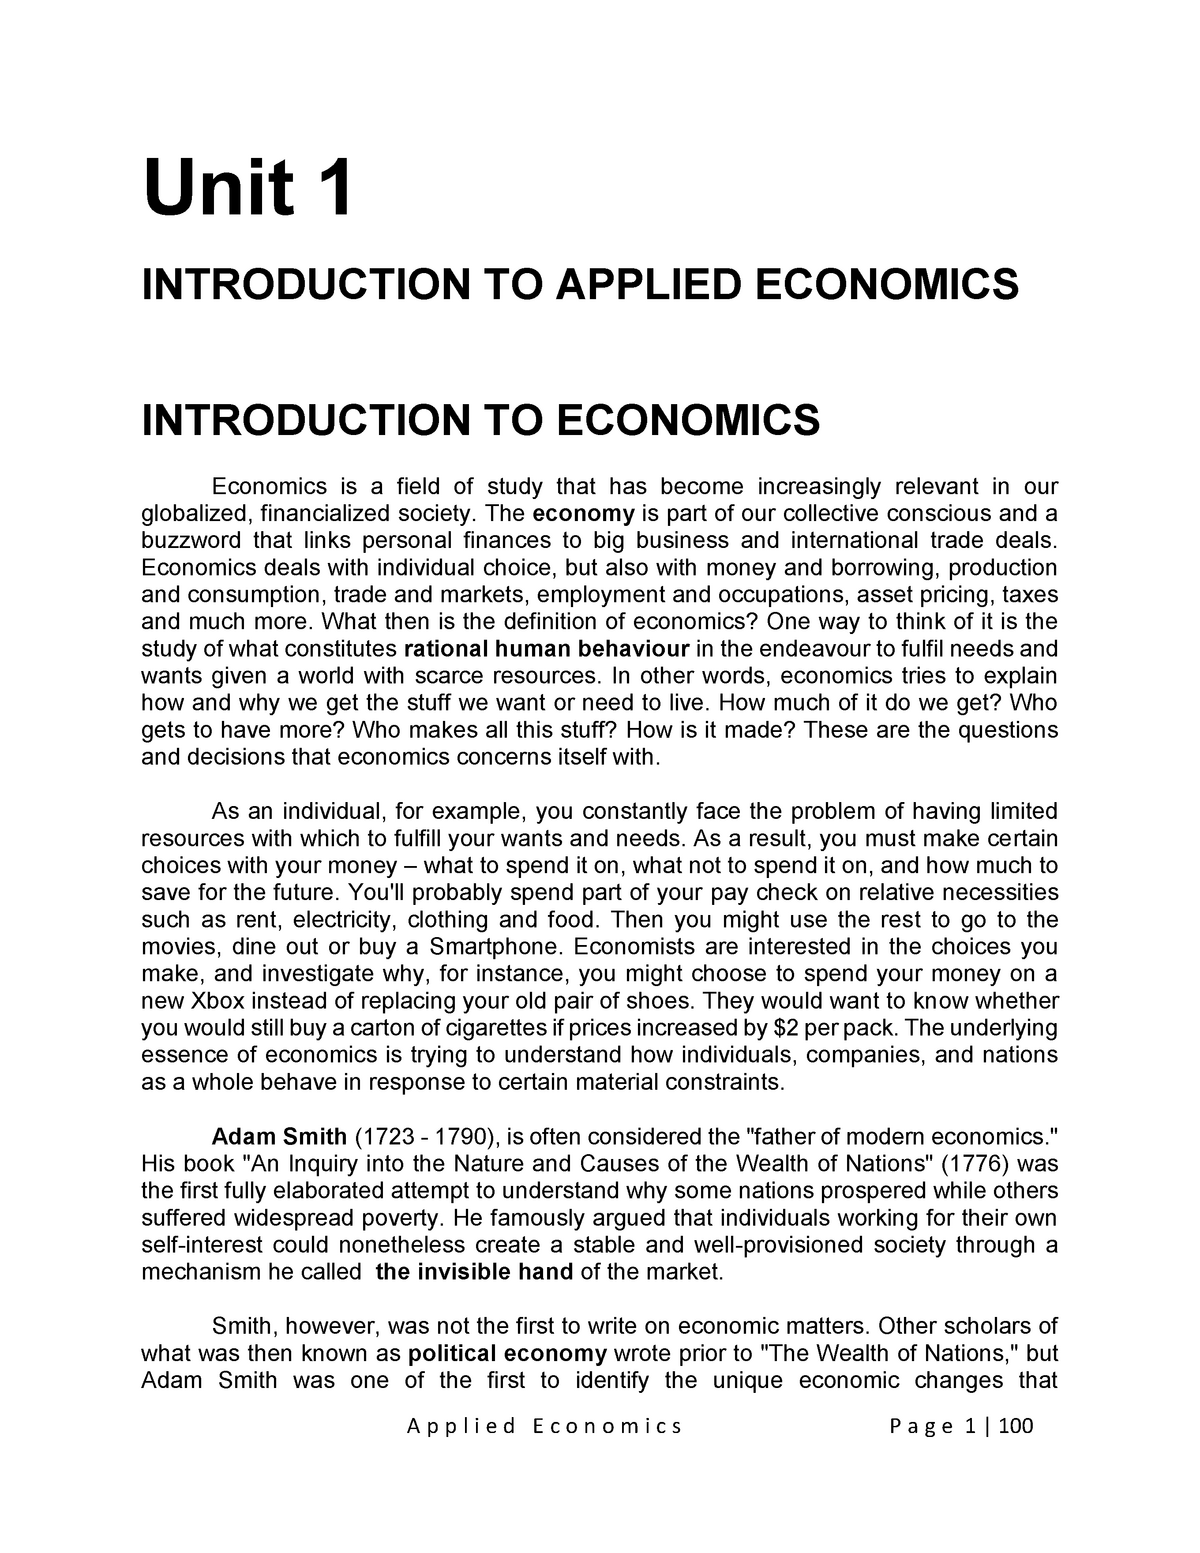 what is the importance of applied economics essay